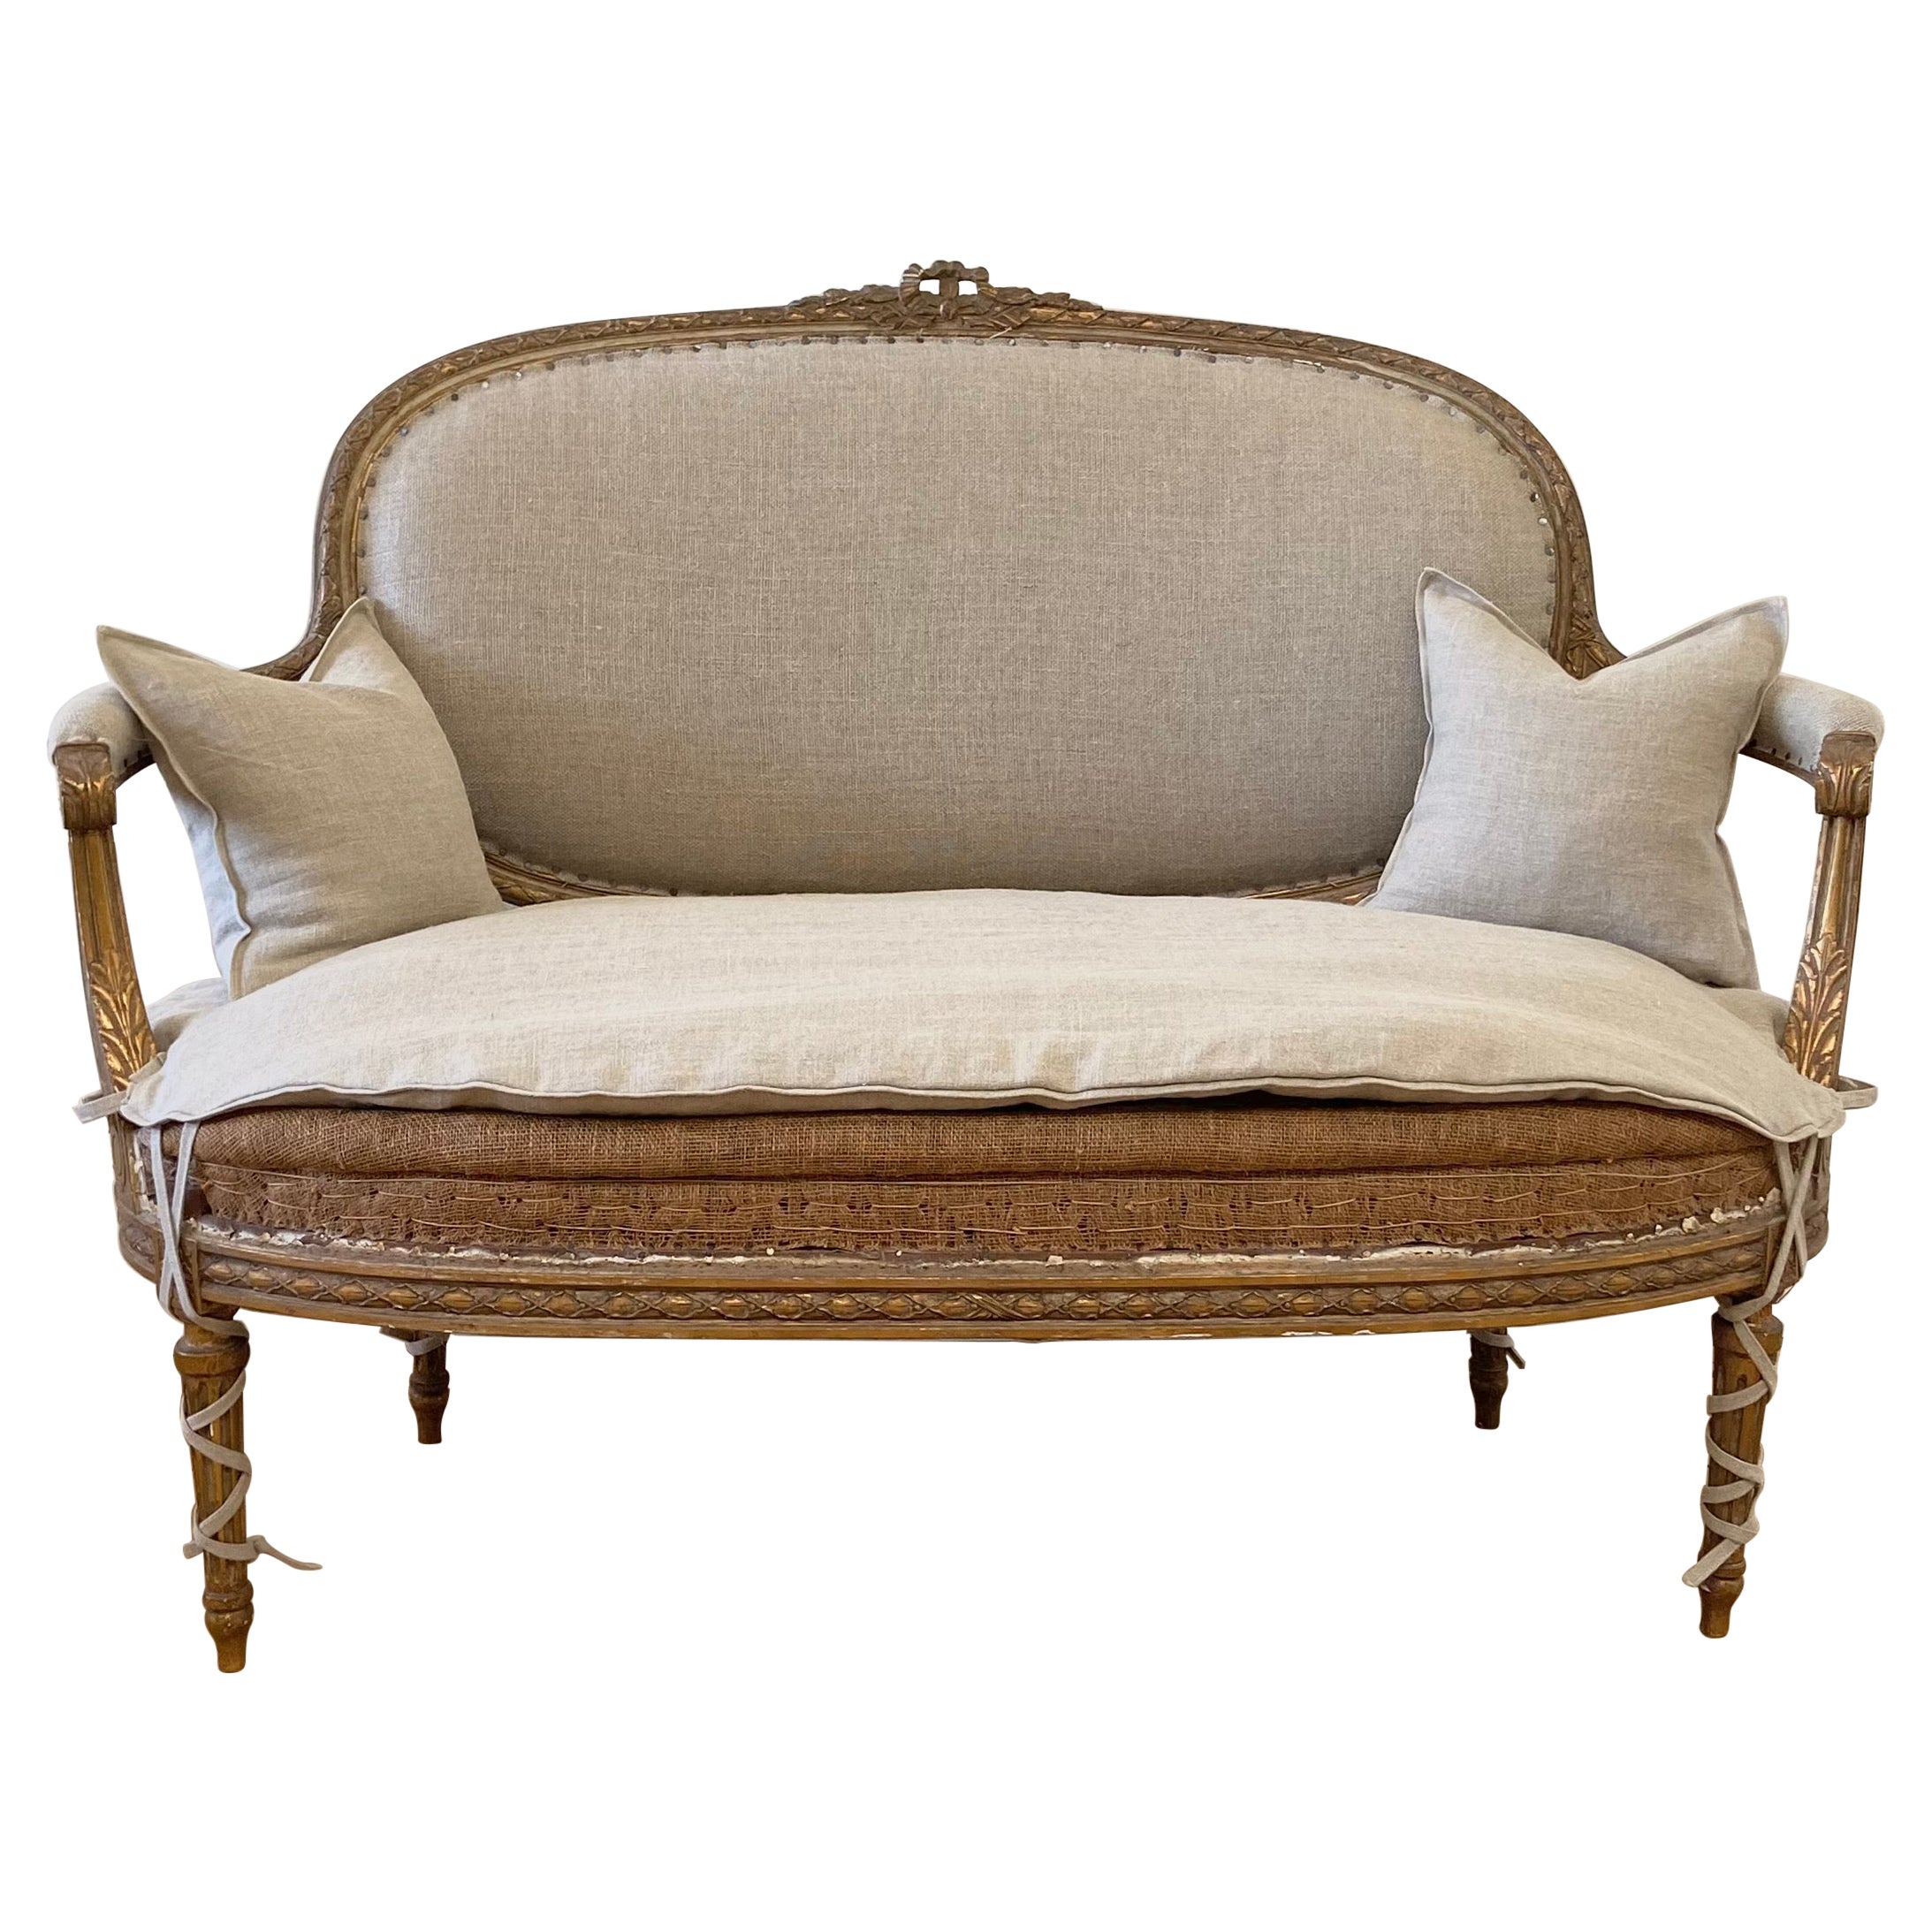 Antique Gilt Wood French Louis XVI Style Open Arm Settee